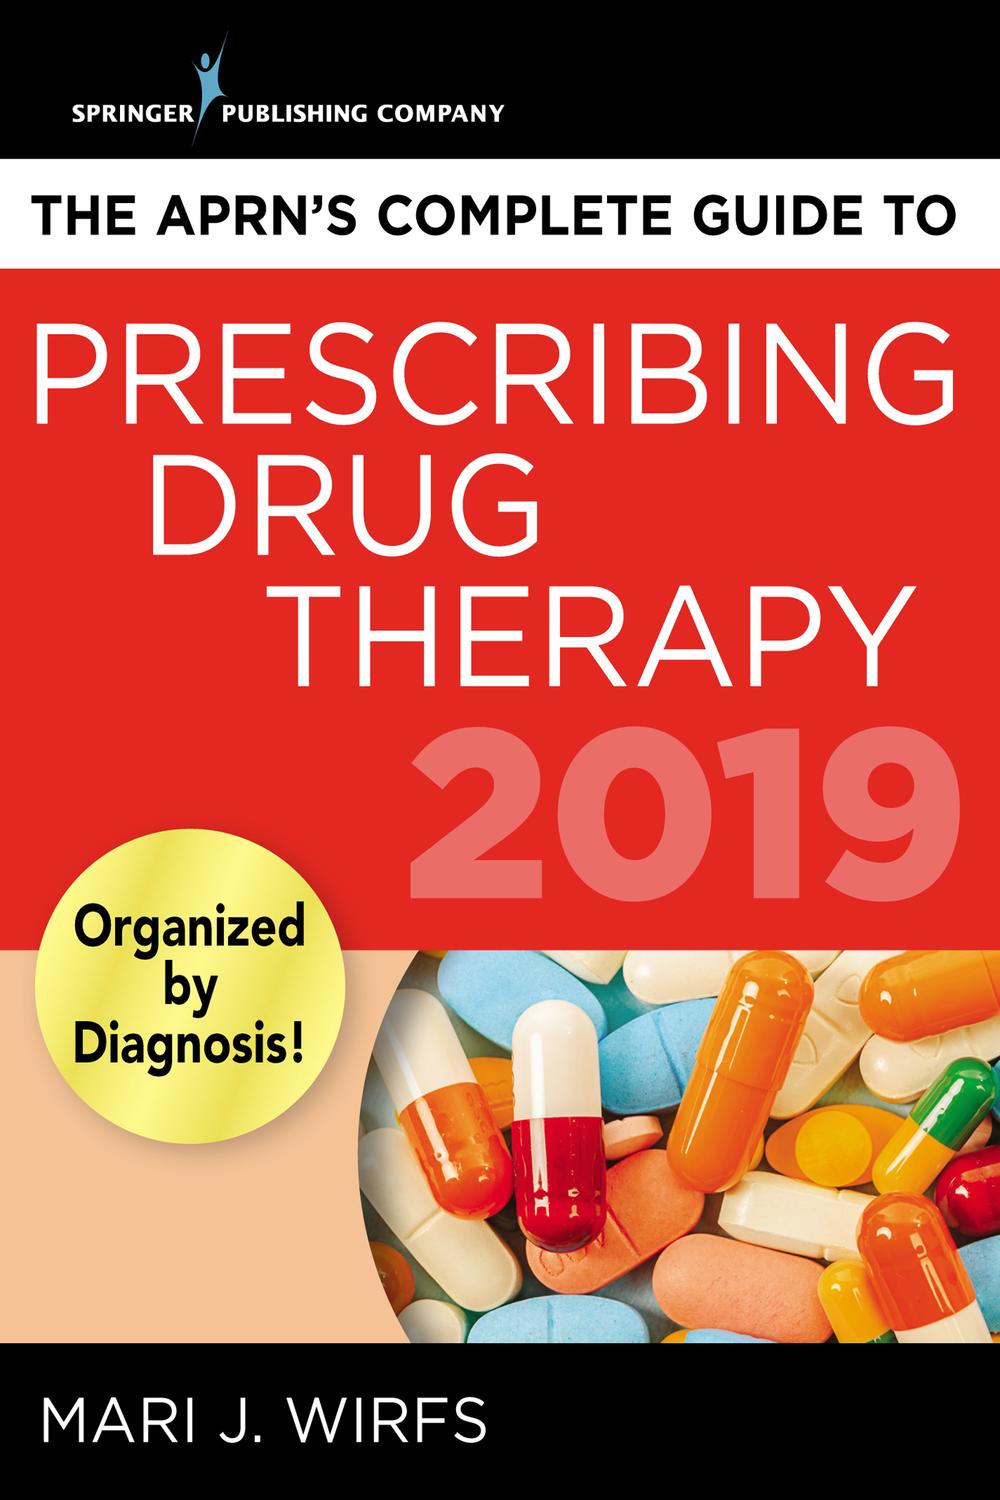 he APRN’s Complete Guide to Prescribing Drug Therapy 2019th Edition